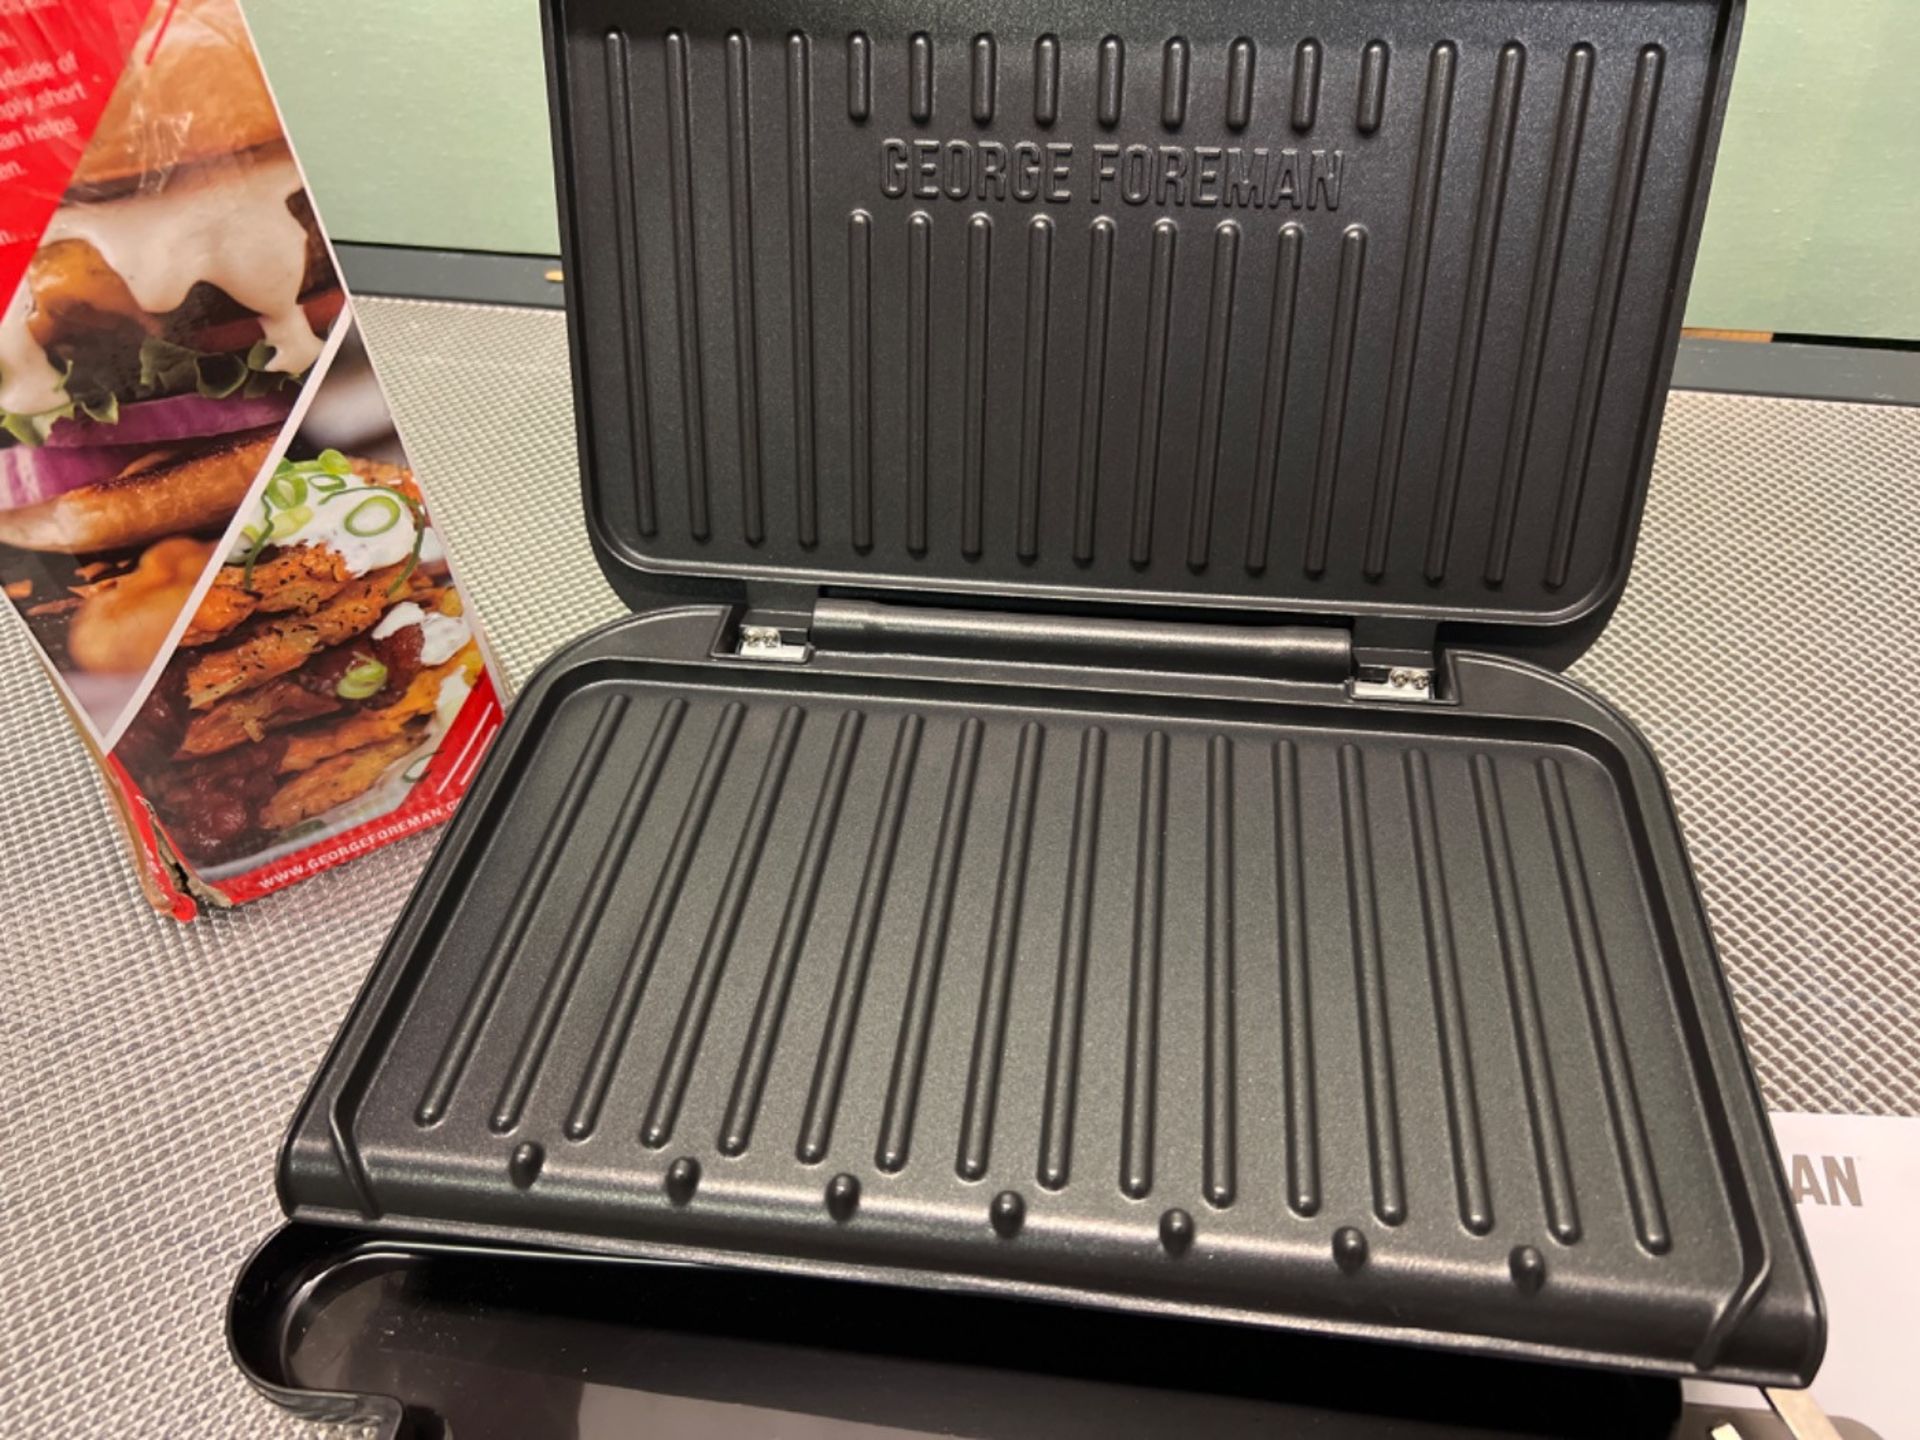 George Foreman 25810 Medium Fit Grill - Versatile Griddle, Hot Plate and Toastie Machine with Impro - Image 2 of 3